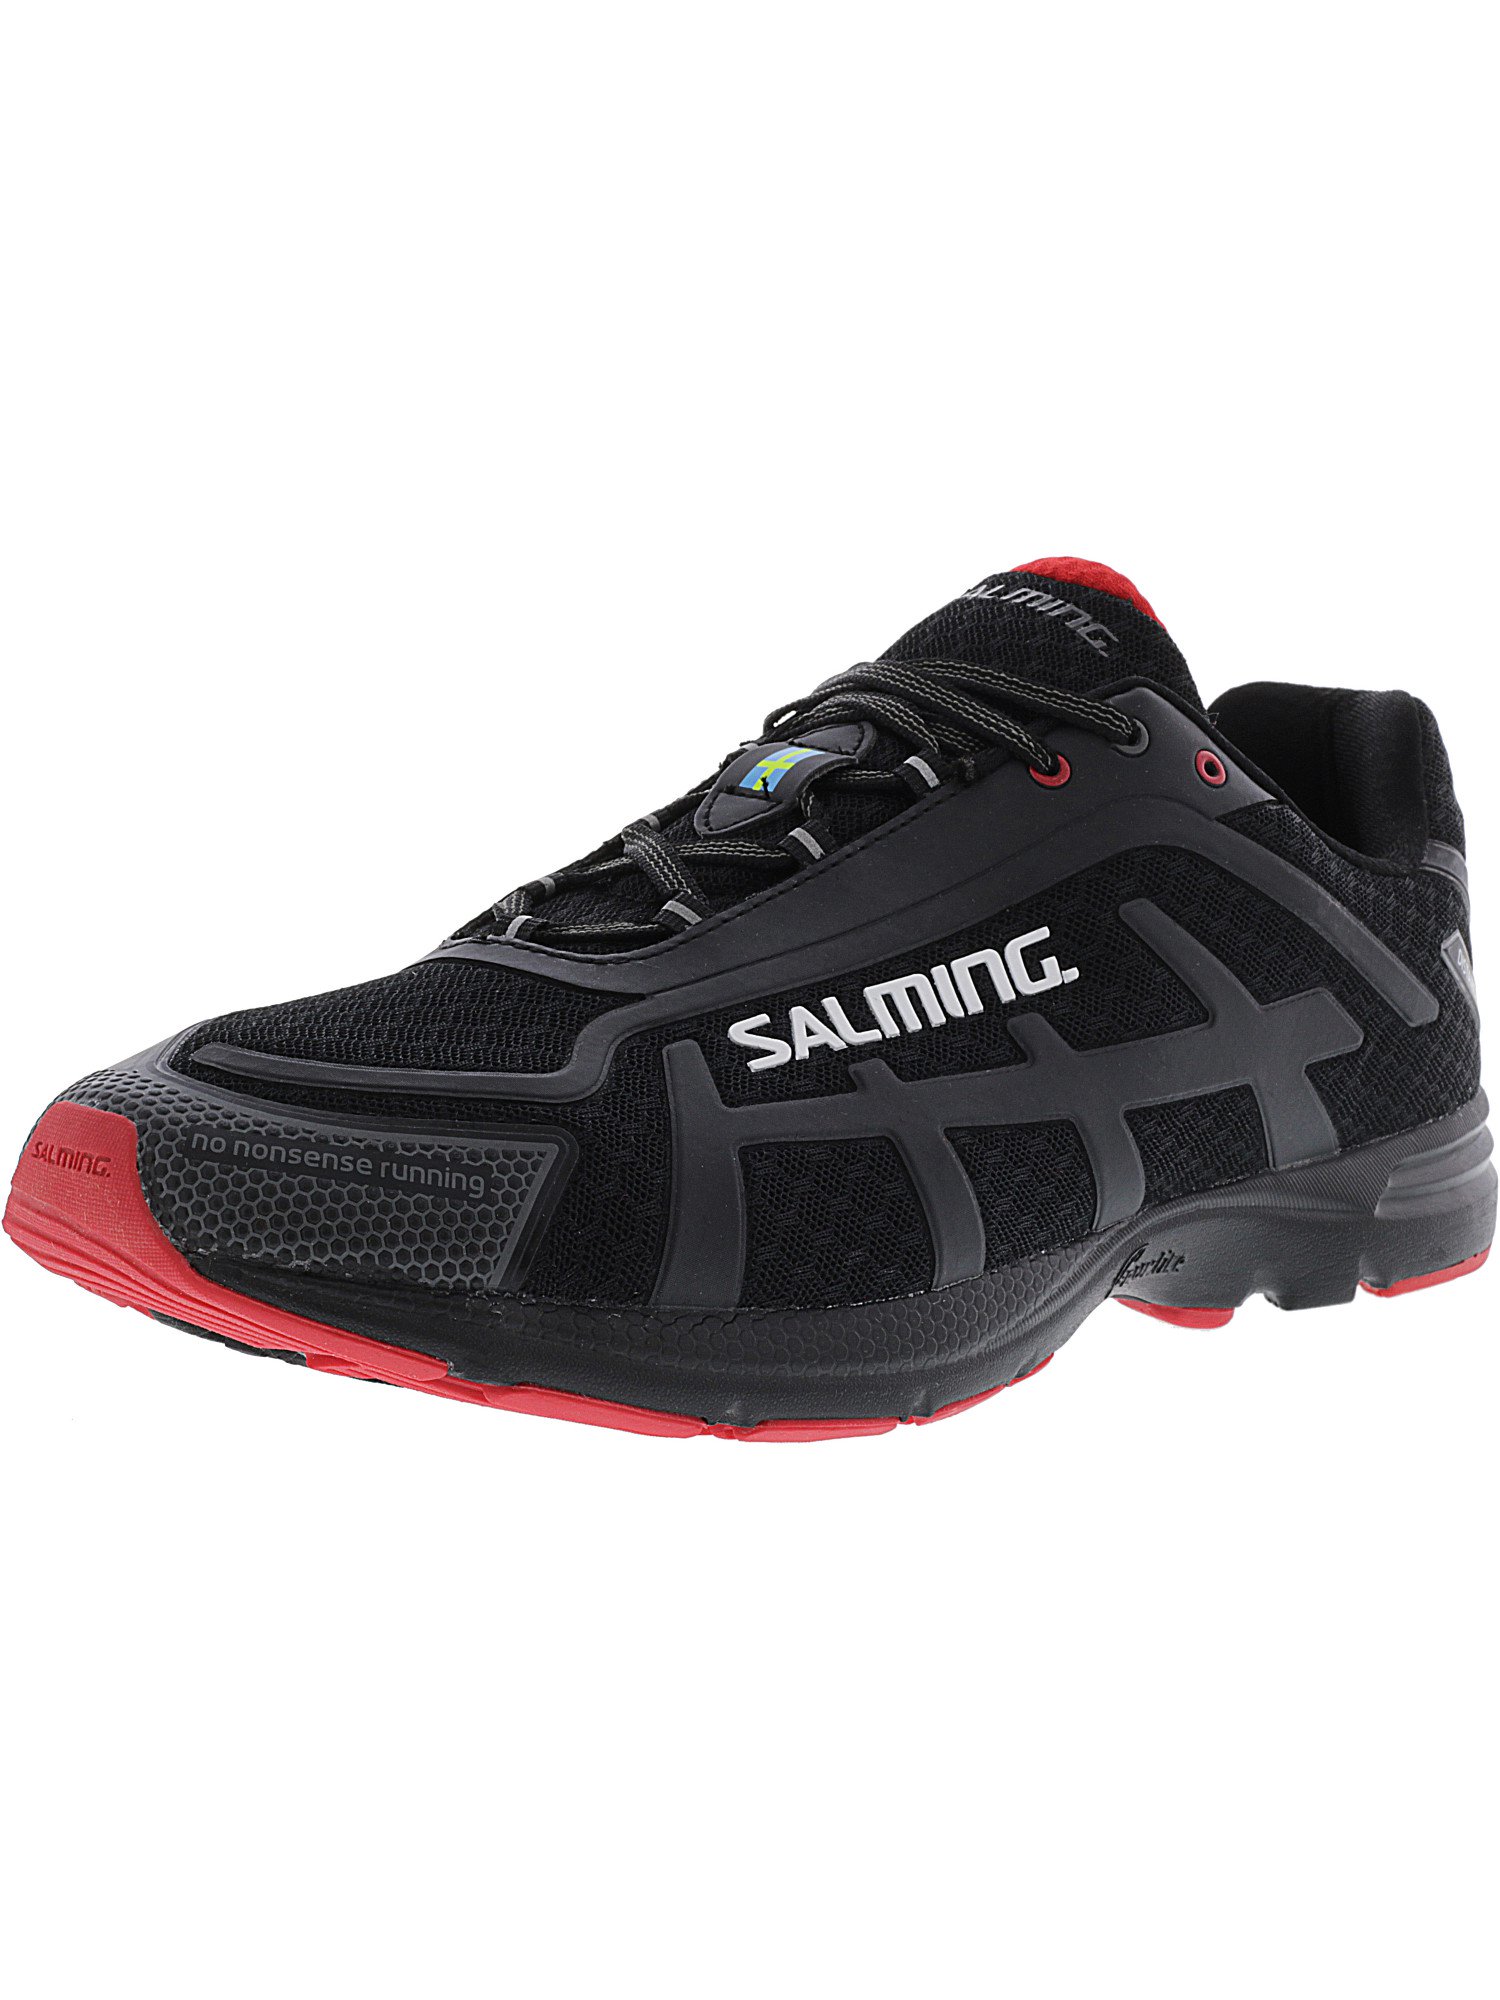 Salming Men's Distance D4 Black / Red Ankle-High Running Shoe - 12.5M - image 1 of 3